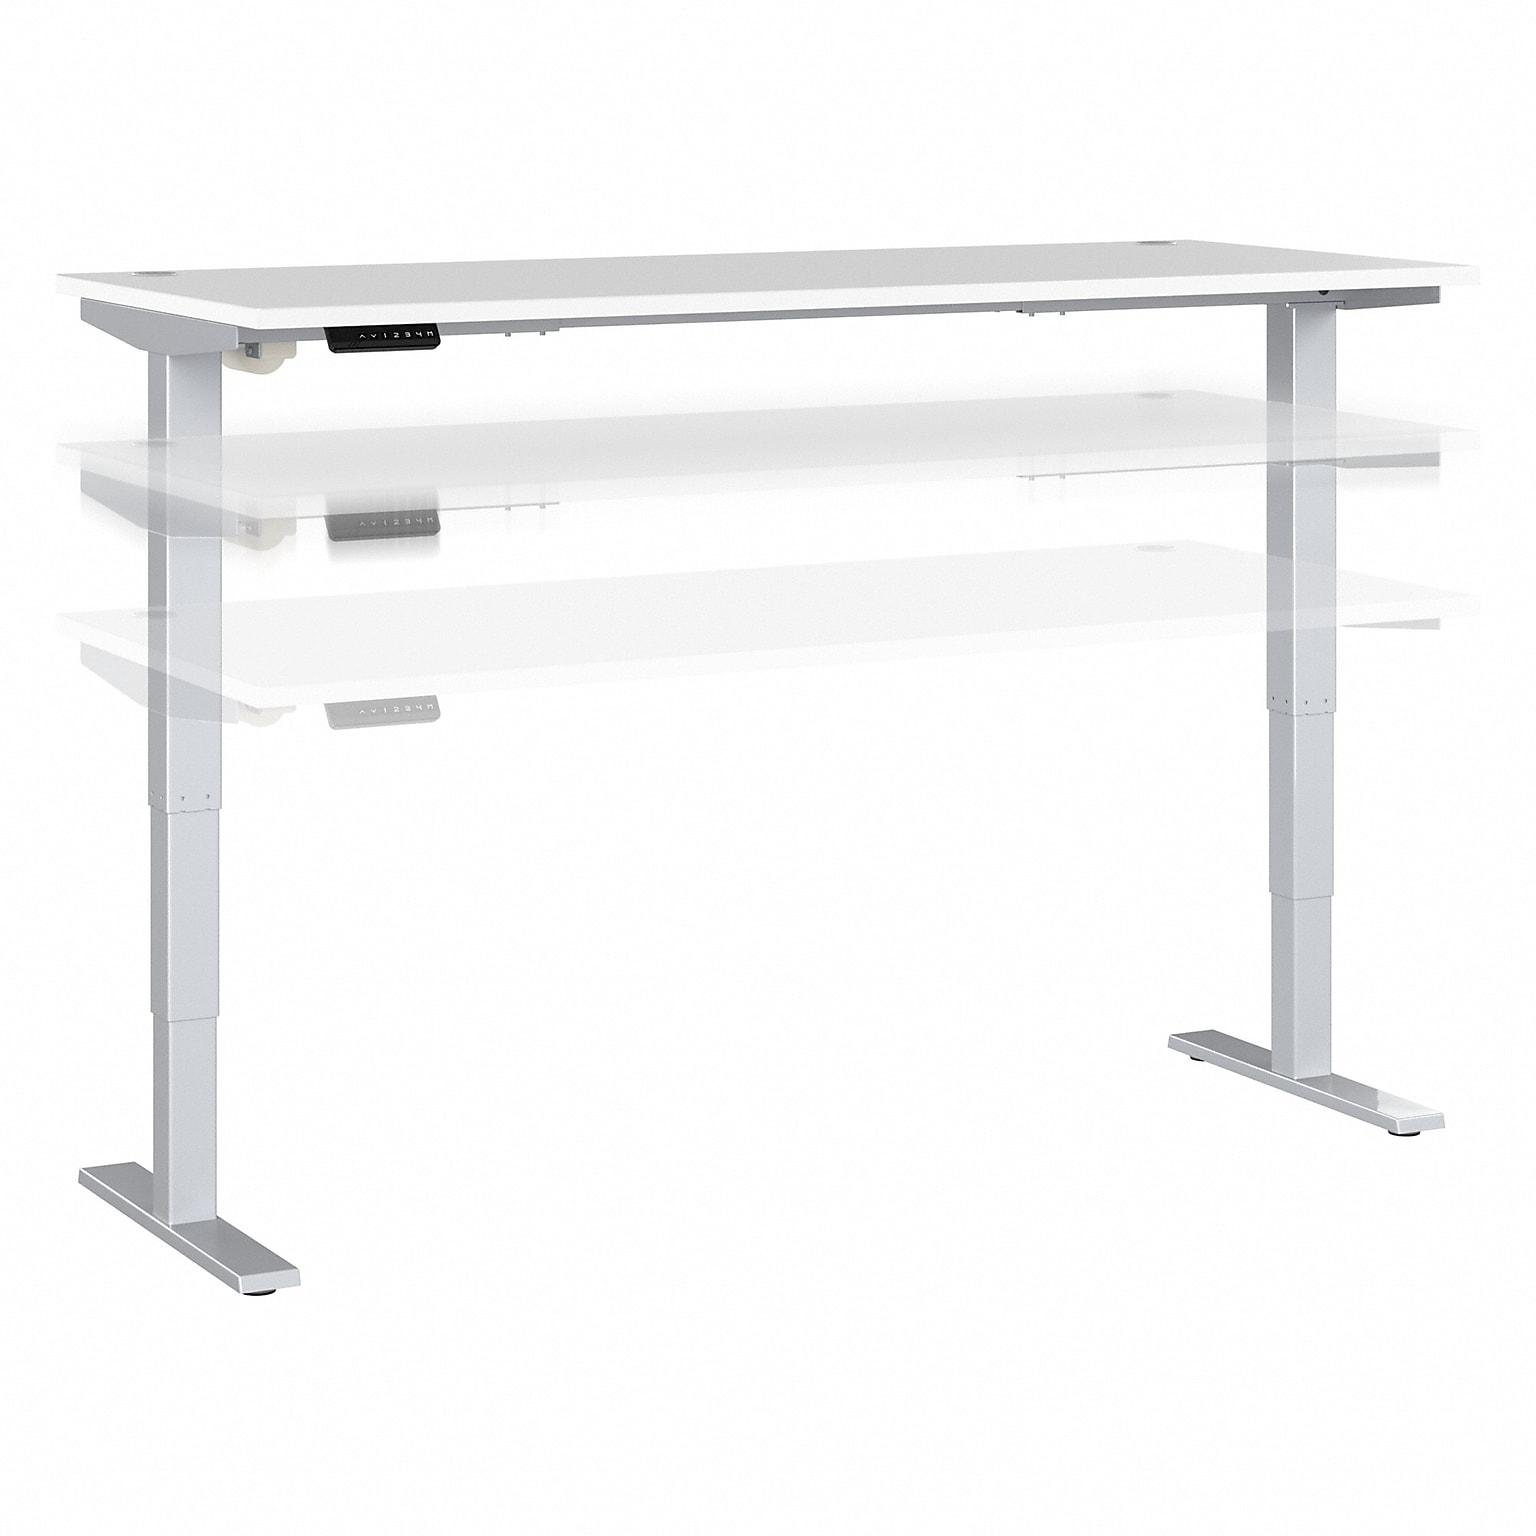 Bush Business Furniture Move 40 Series 72W Electric Height Adjustable Standing Desk, White/Cool Gray Metallic (M4S7230WHSK)